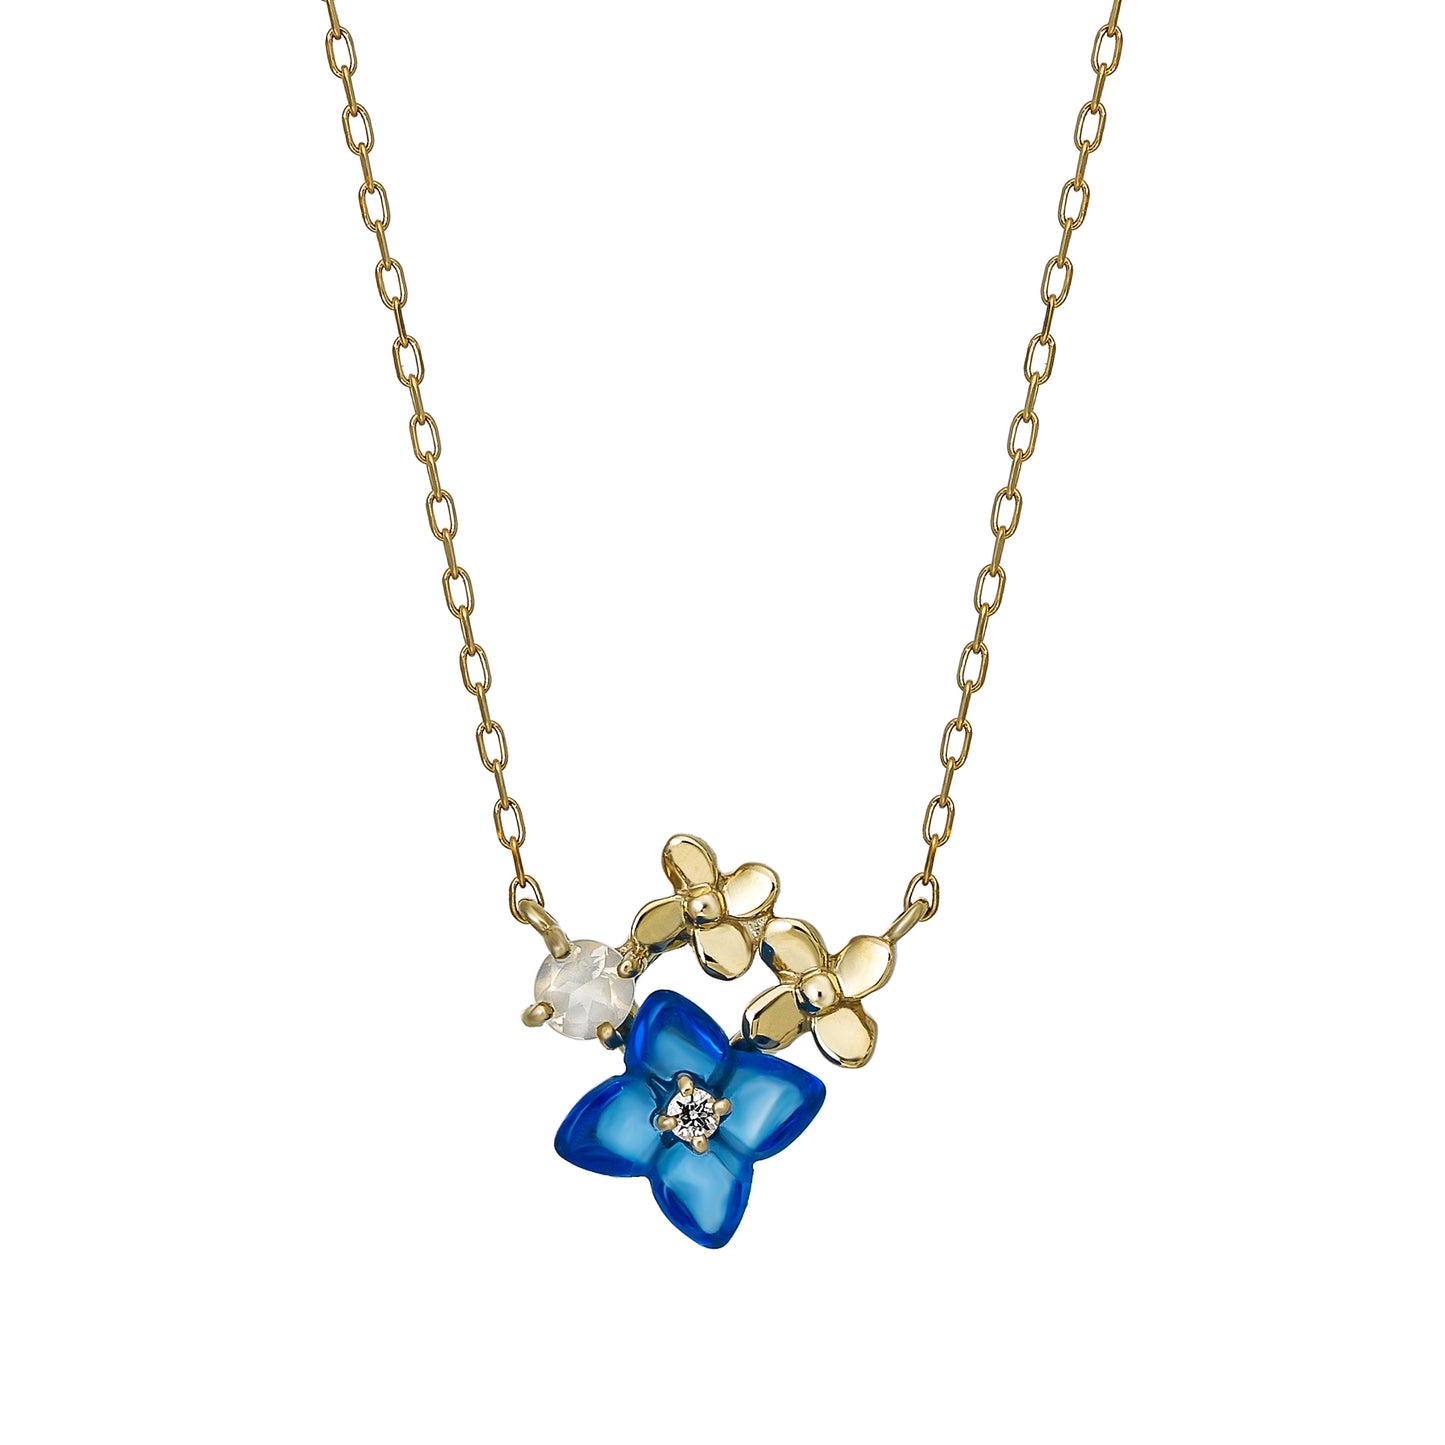 [Birth Flower Jewelry] June - Hydrangea Necklace (10K Yellow Gold) - Product Image